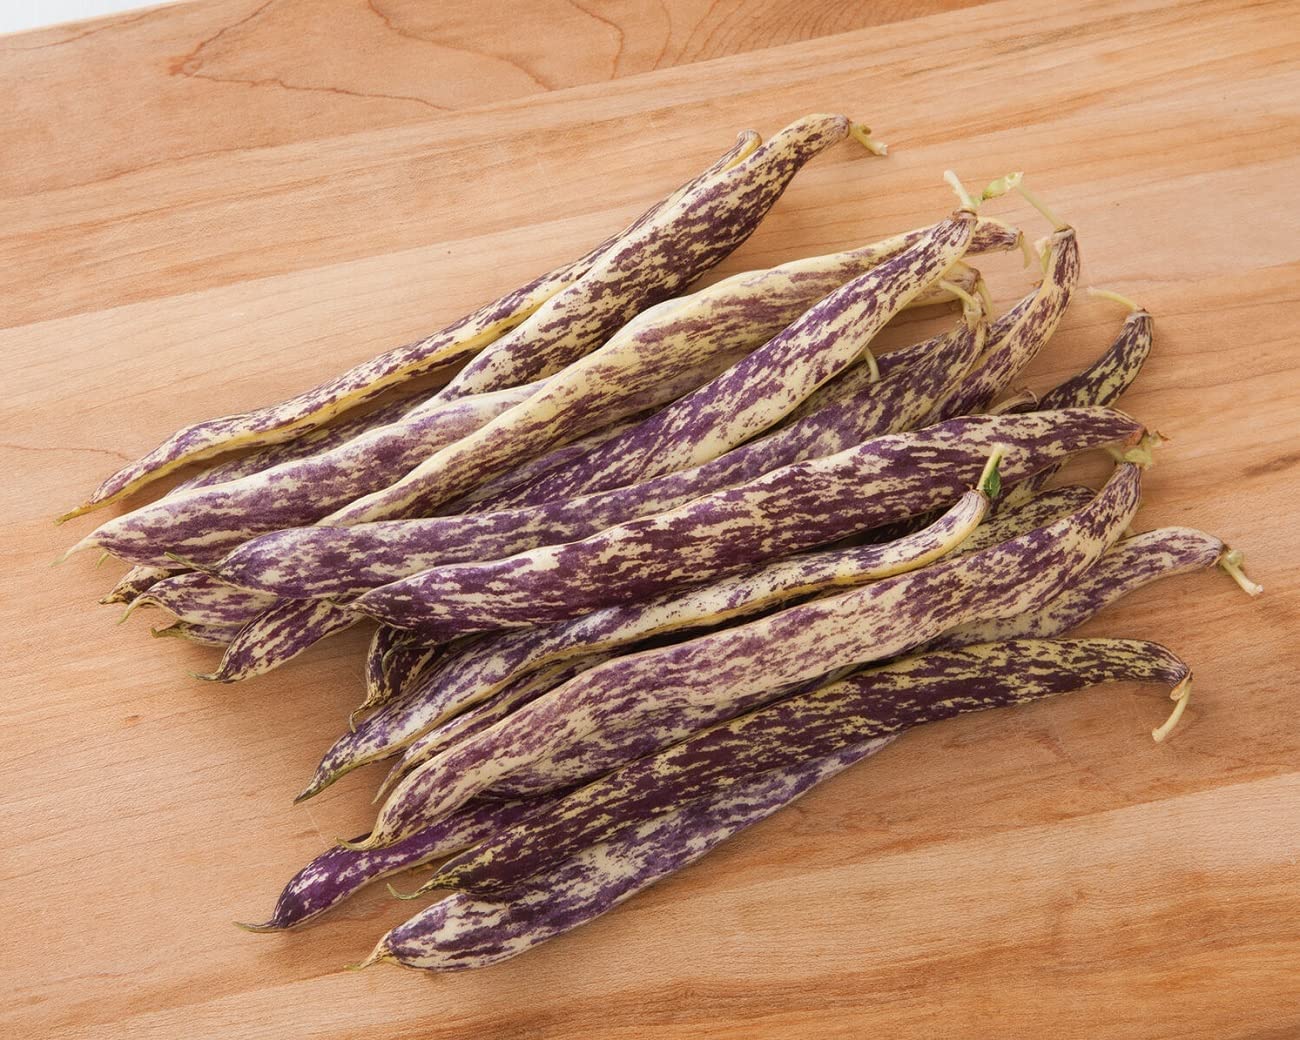 Unique flashy heirloom. Avg. 6–6 1/2" flat pods are pale yellow with purple streaks. They are tender and sweet and good in salads or cooked. Purple disappears upon cooking. Tan seeds with dark speckles.